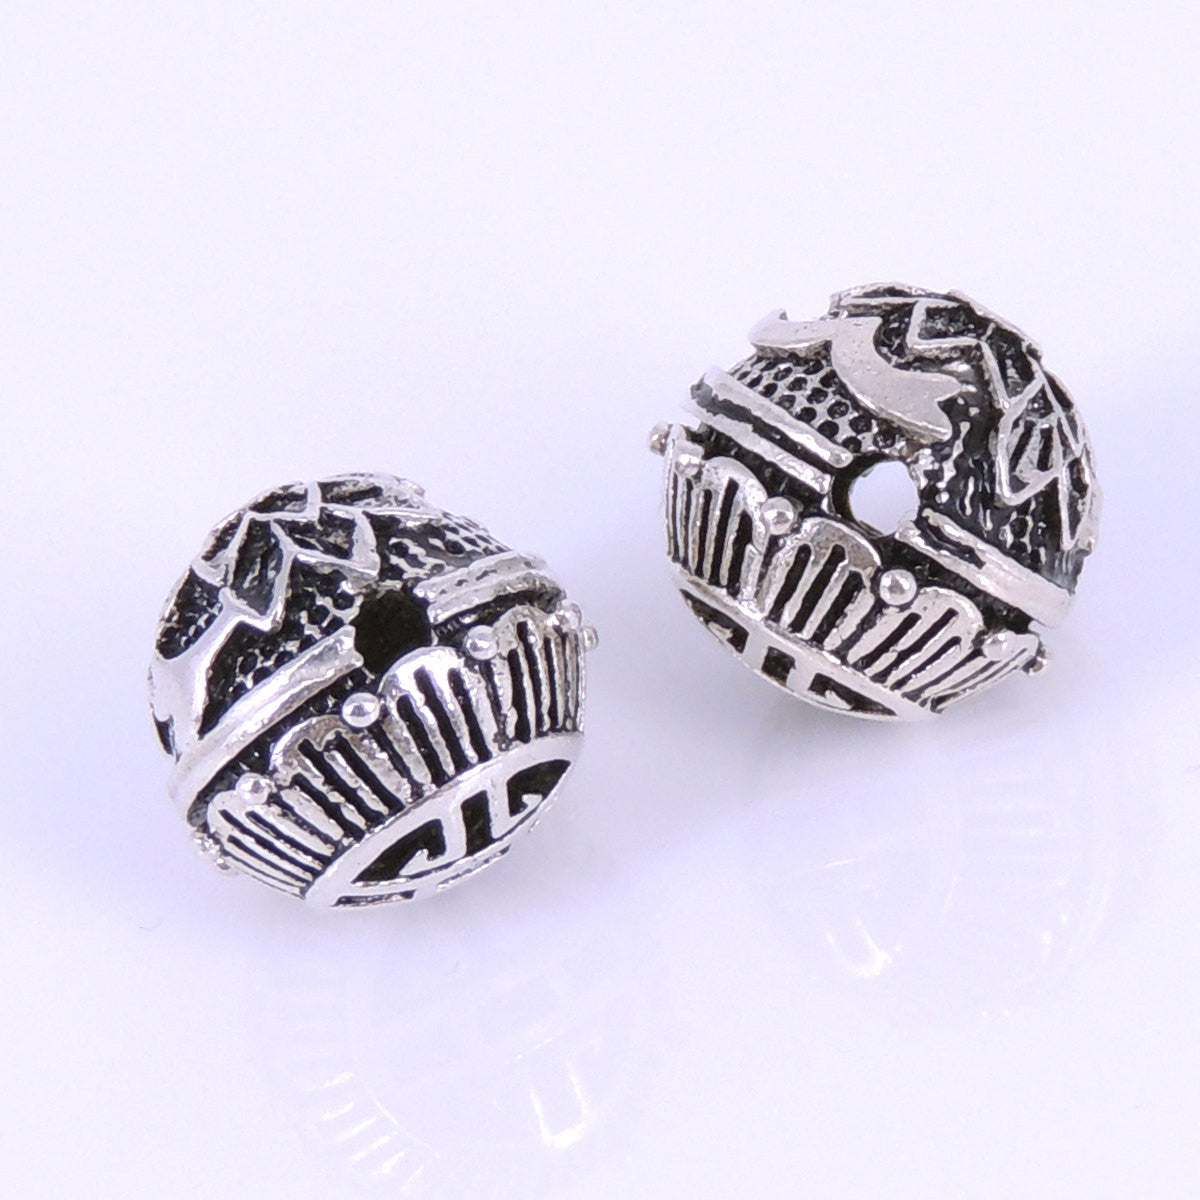 2 PCS Round Vintage Lotus Charm Beads - S925 Sterling Silver WSP263X2